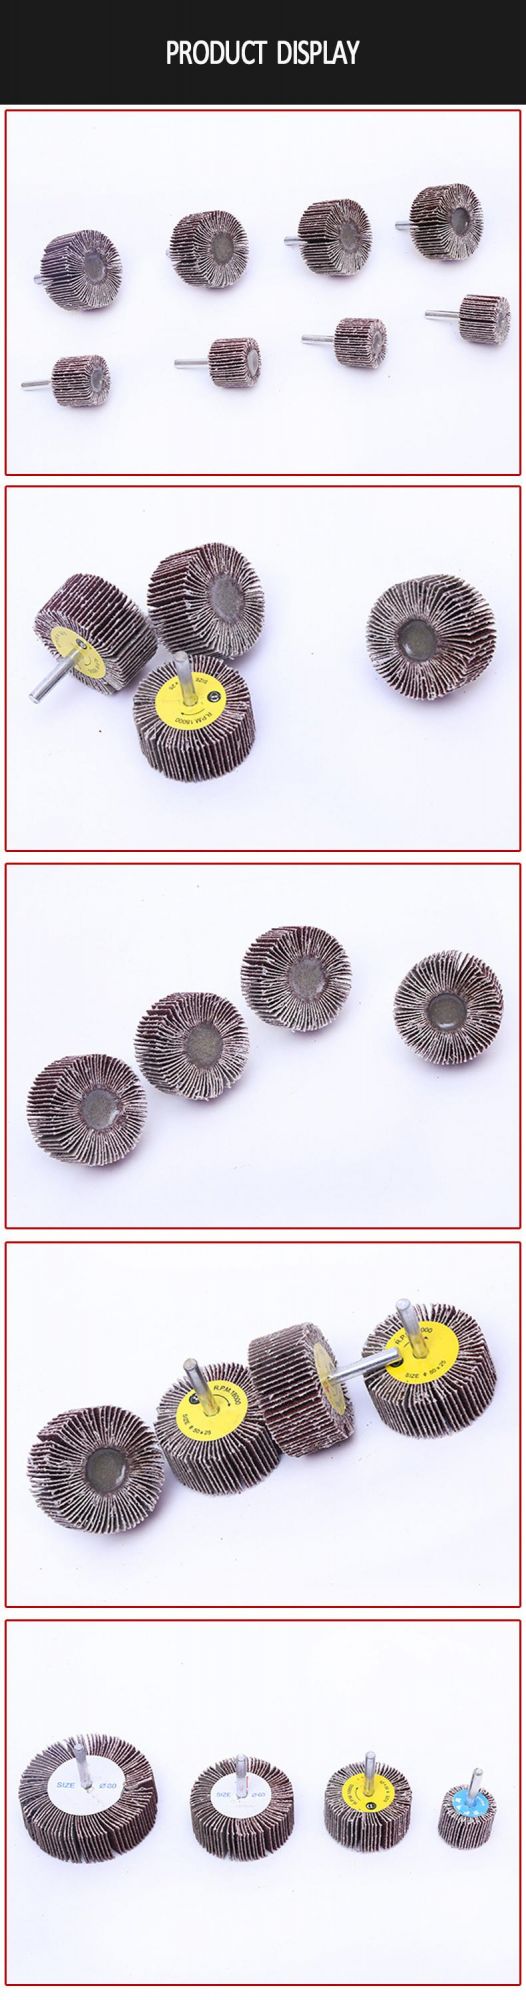 Abrasive Mounted Mini Sanding Flap Disc with Shank